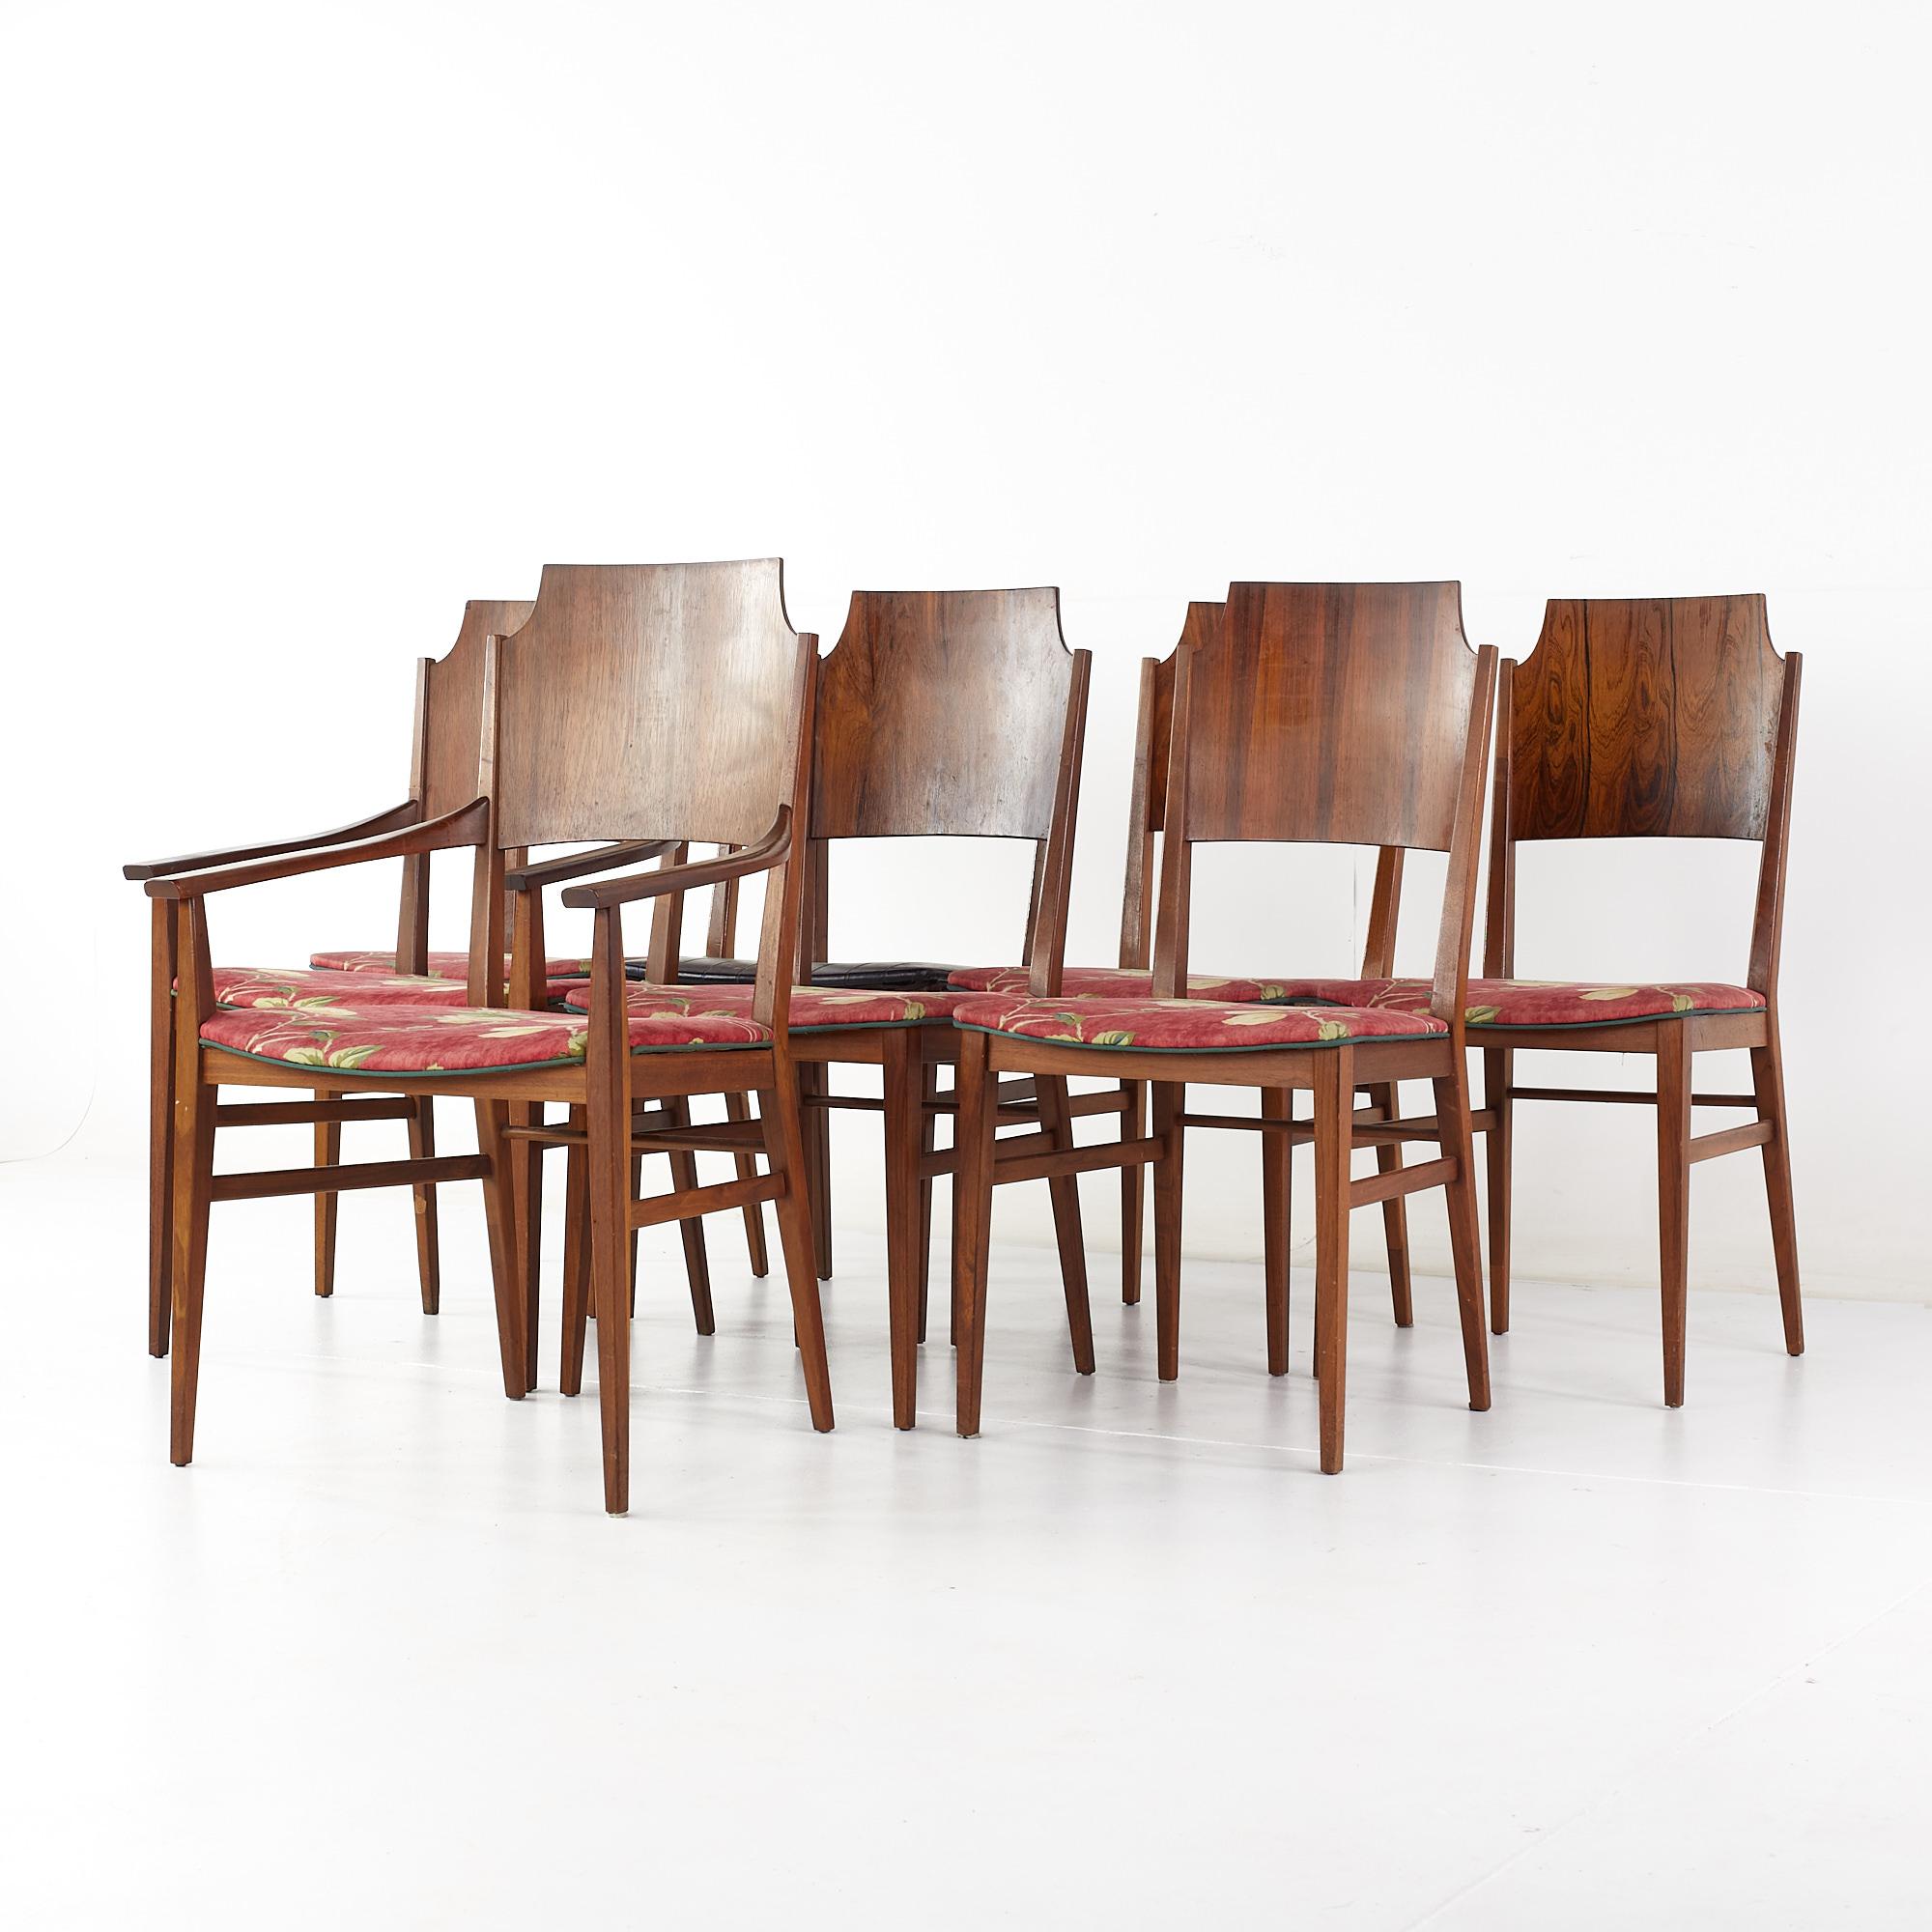 Mid-Century Modern Paul McCobb for Lane Delineator Mid Century Rosewood Dining Chairs - Set of 8 For Sale